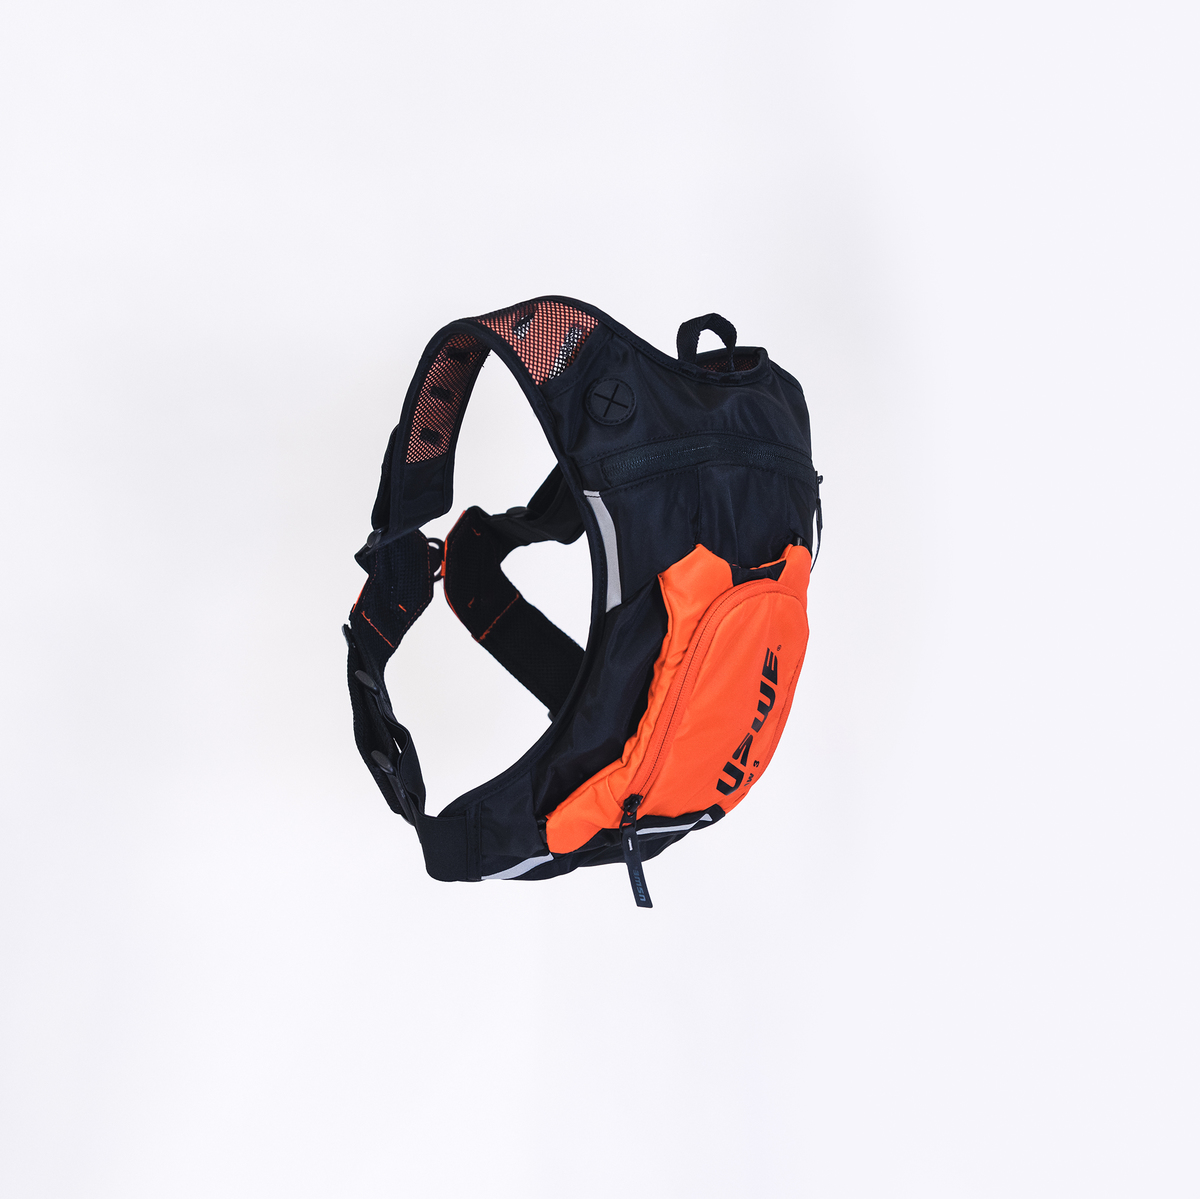 8_USWE RAW 3 Hydration Backpack designed by KISKA_front 3-4 view_Square